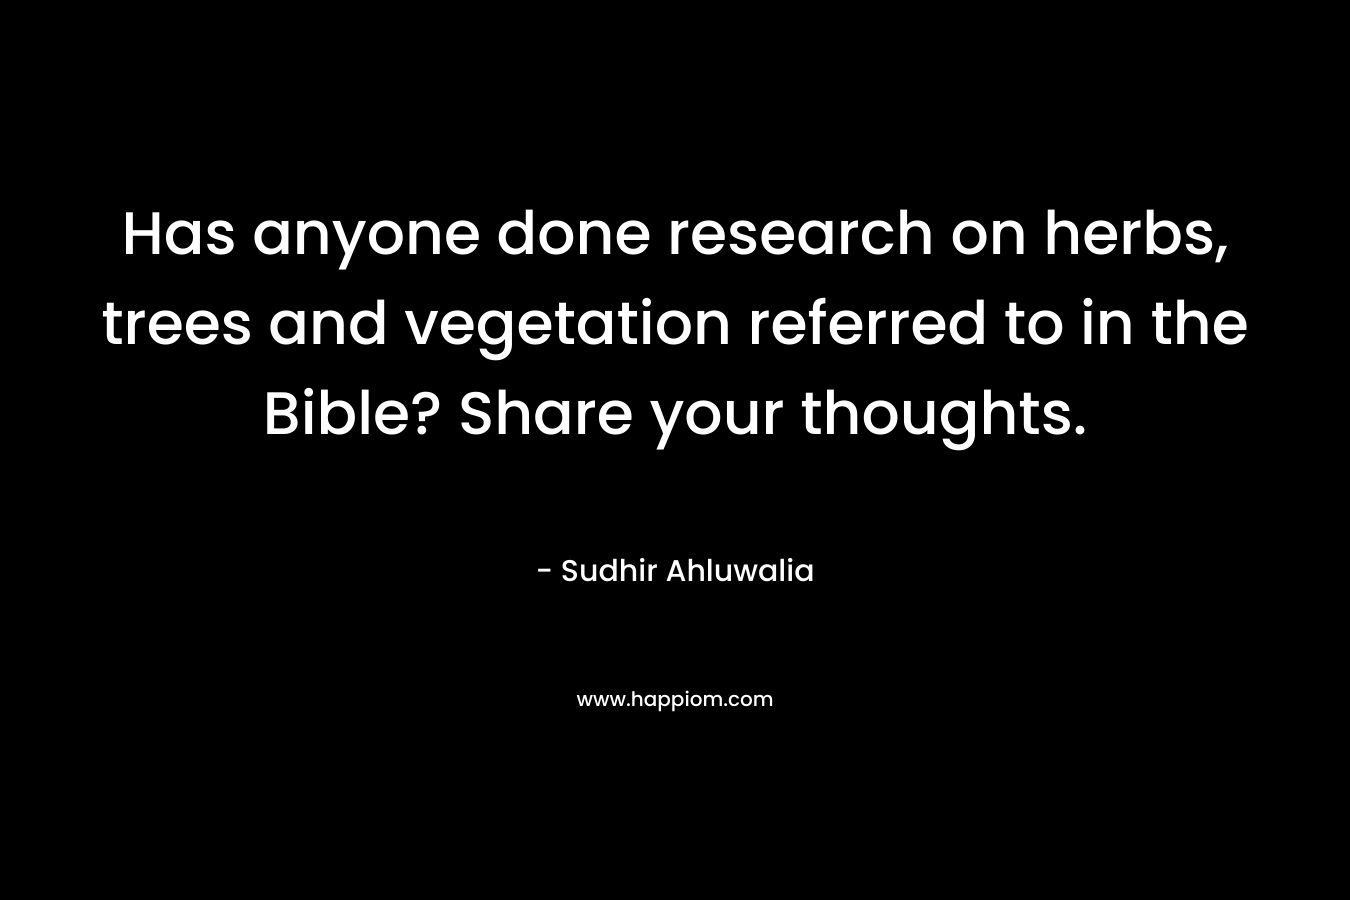 Has anyone done research on herbs, trees and vegetation referred to in the Bible? Share your thoughts.